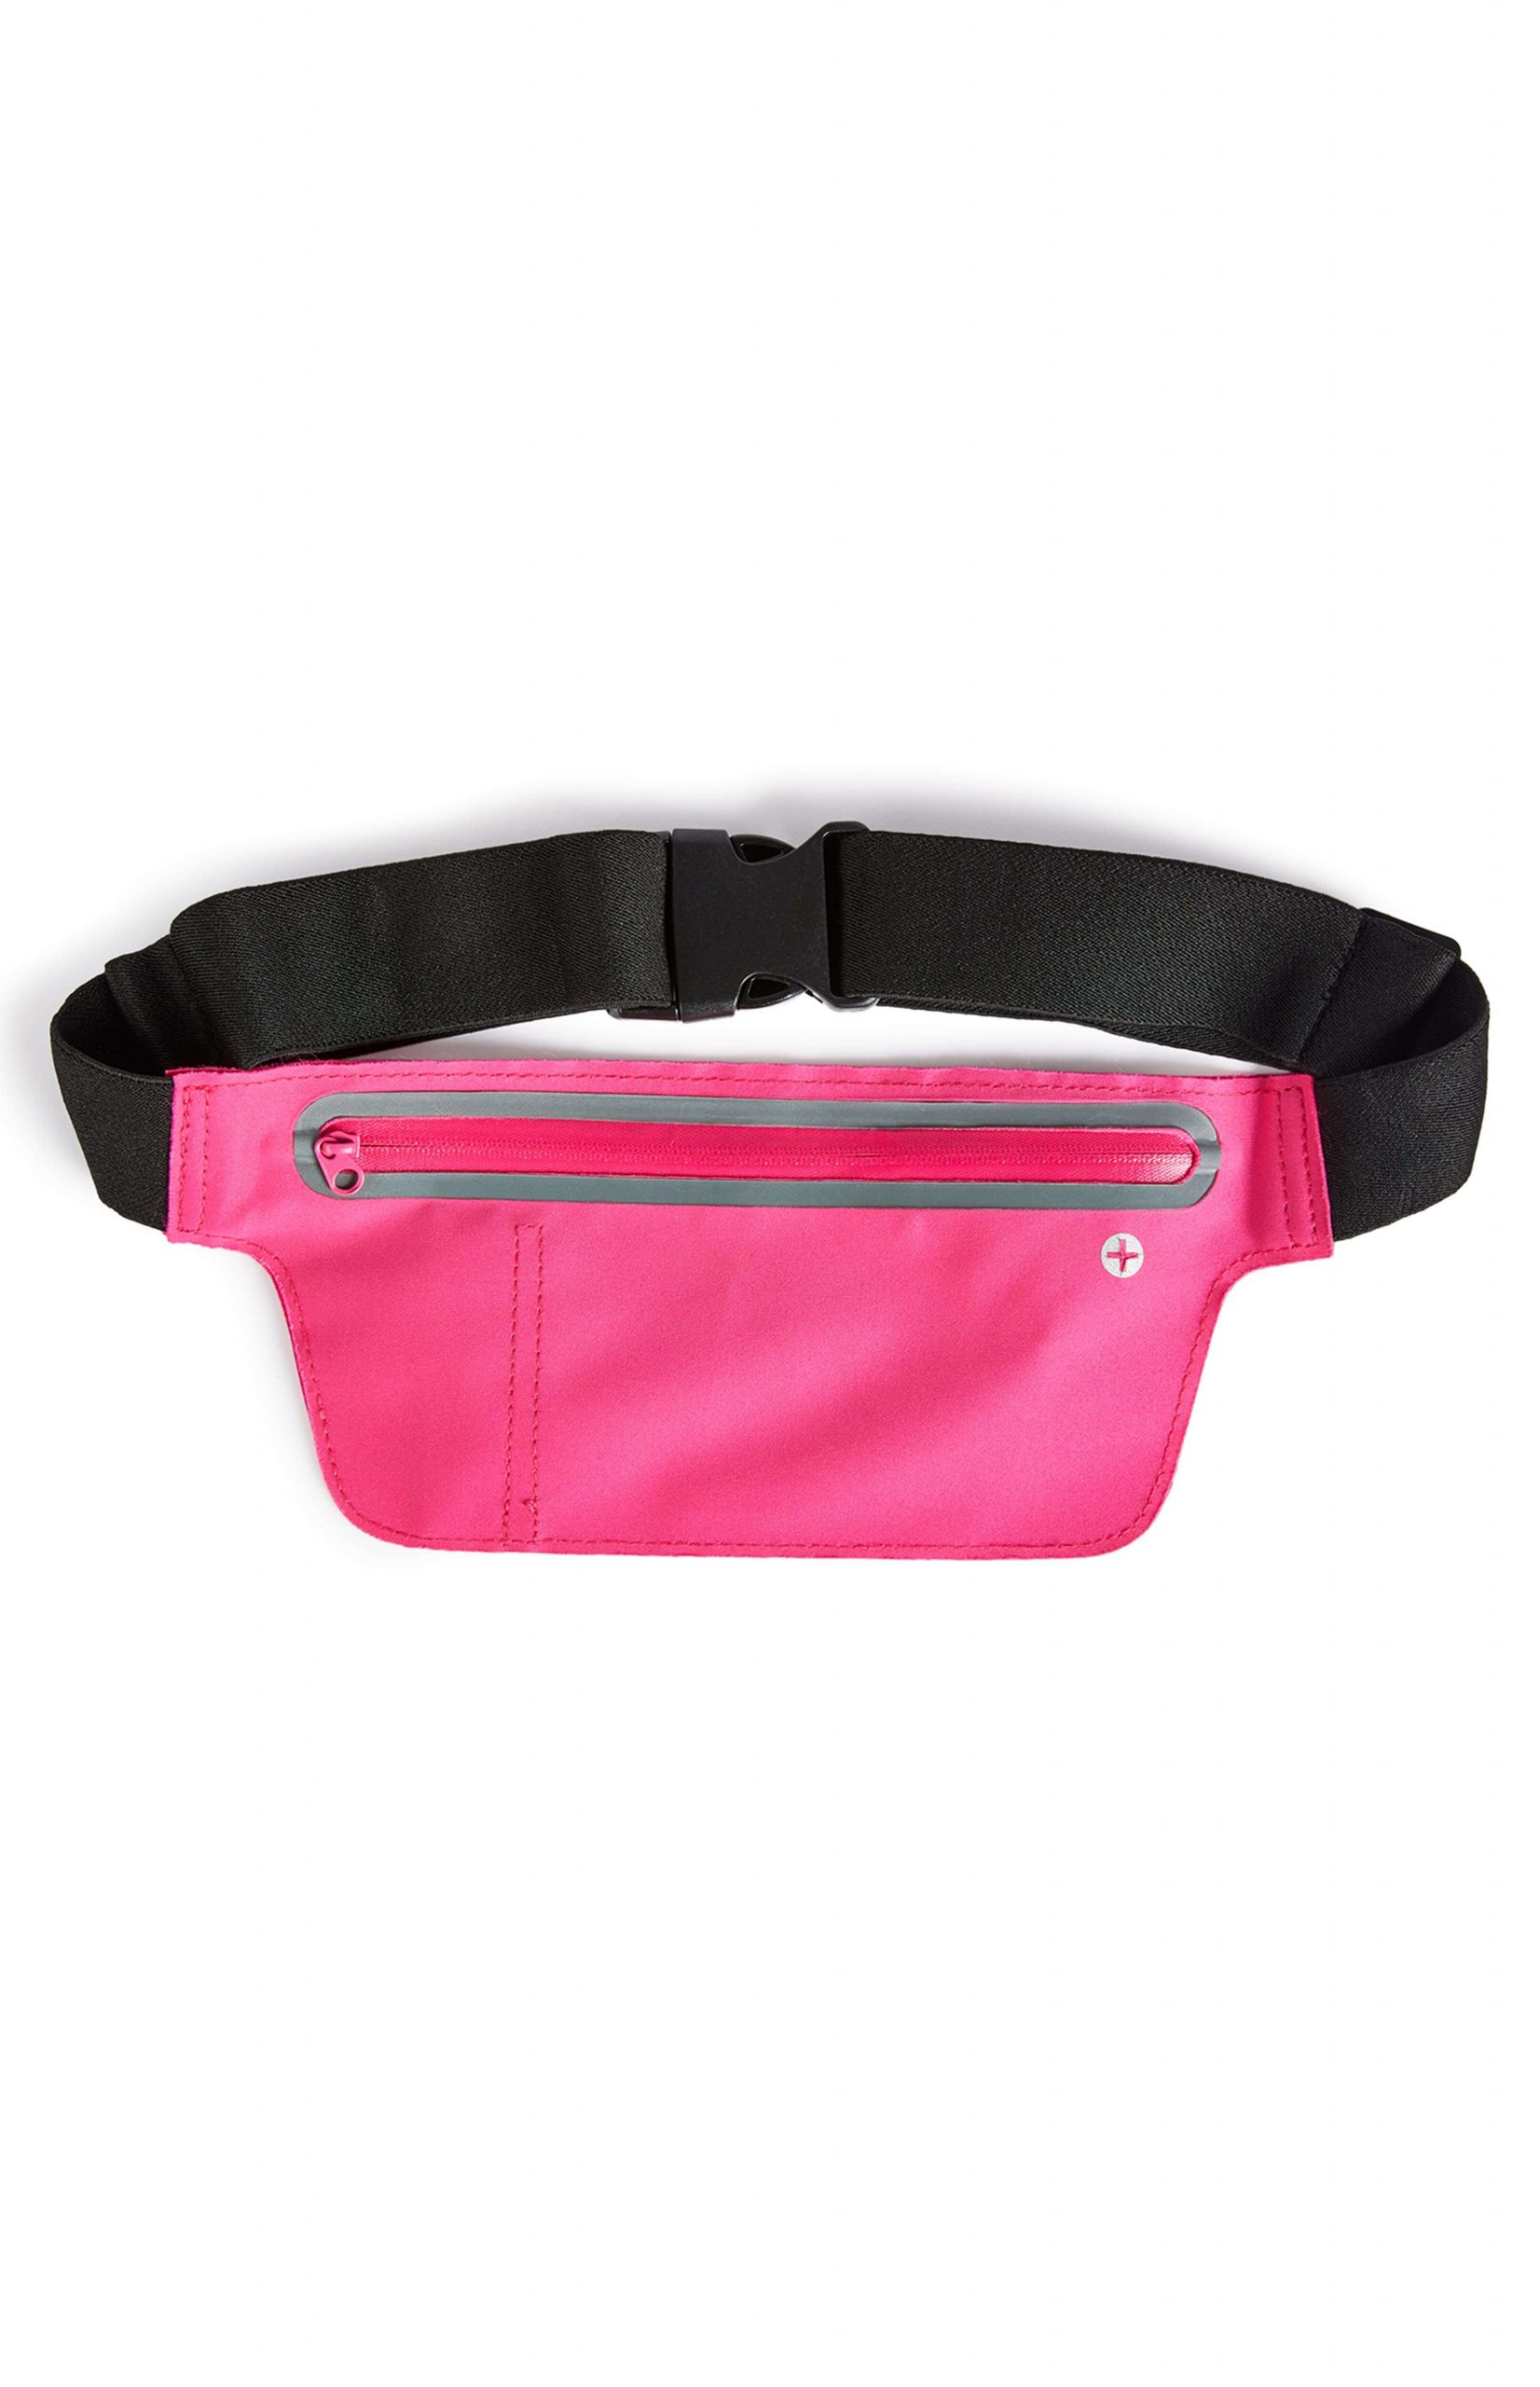 En forma, en invierno también - primark kimball 1054601 01 workout large pink waist pack 4 4.50 10ad1 scaled